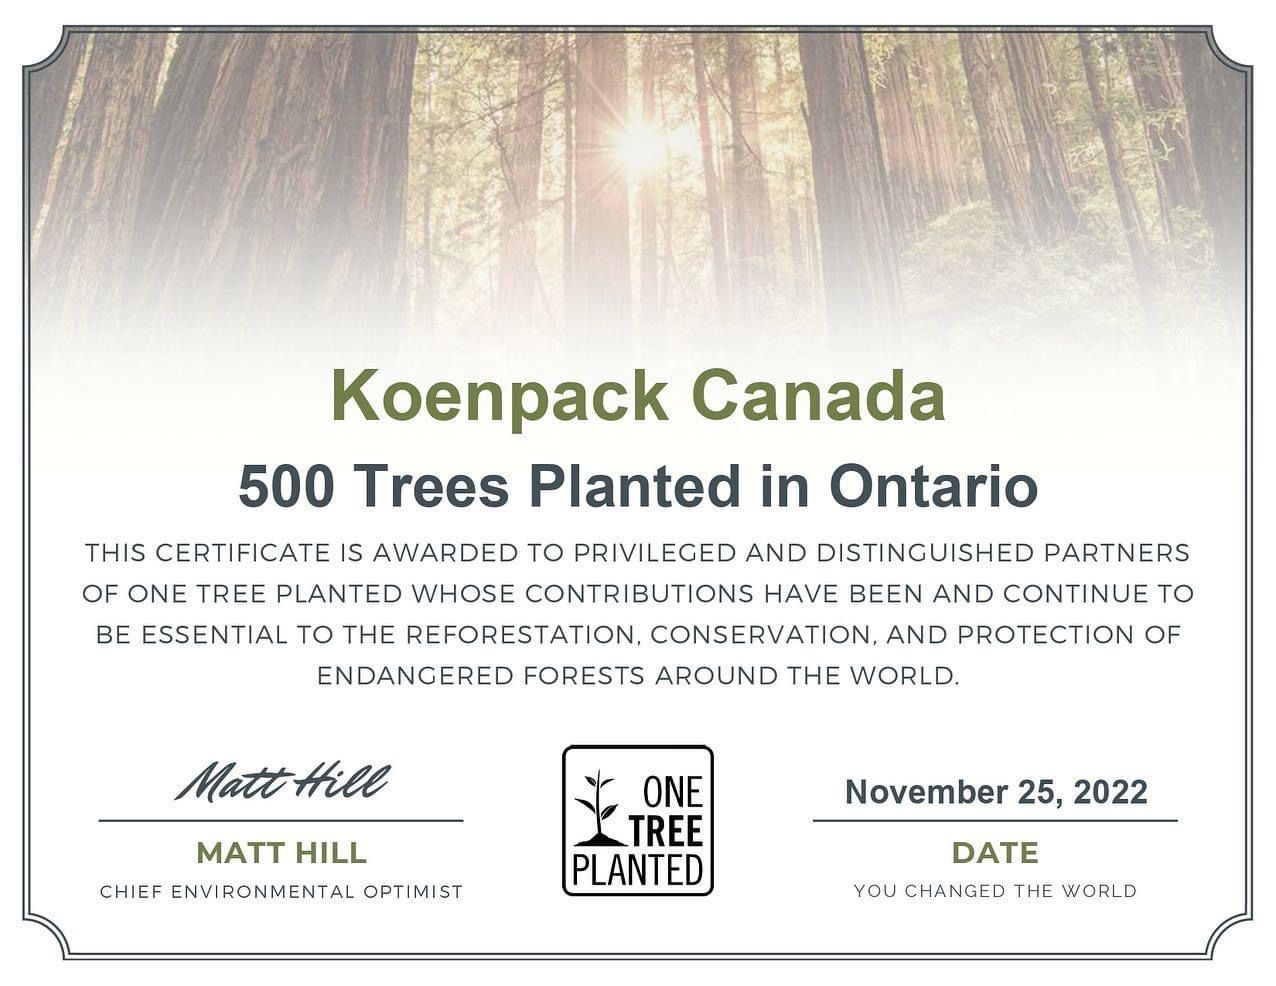 500 Trees Planted in Ontario